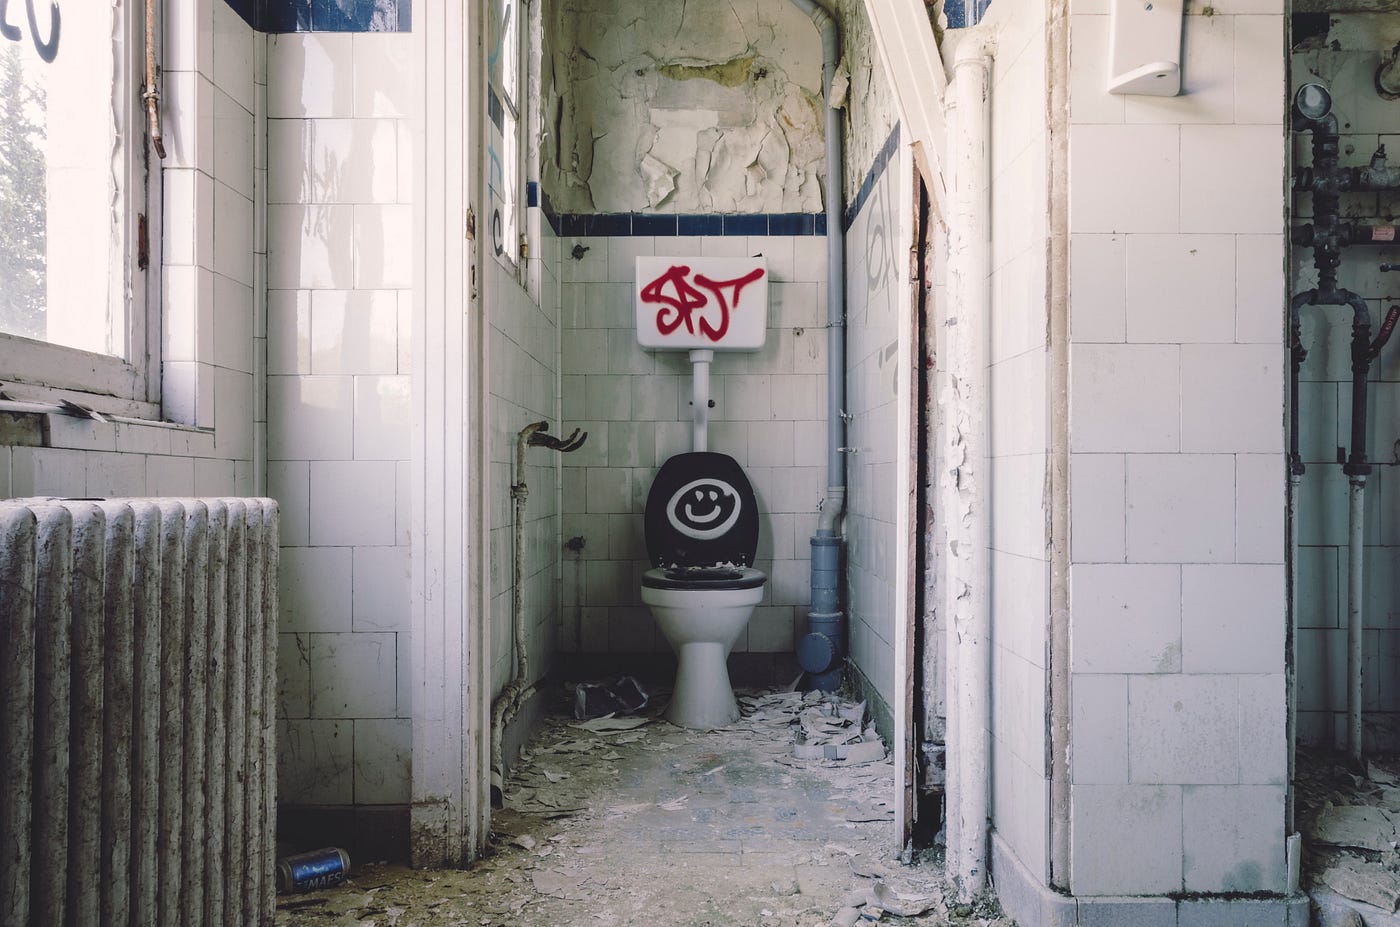 The Terror in the Toilet Whats Up With Bathroom Ghosts, and Why Are They Watching OUR Unfinished Business? by Cat Baklarz Writers Blokke Medium